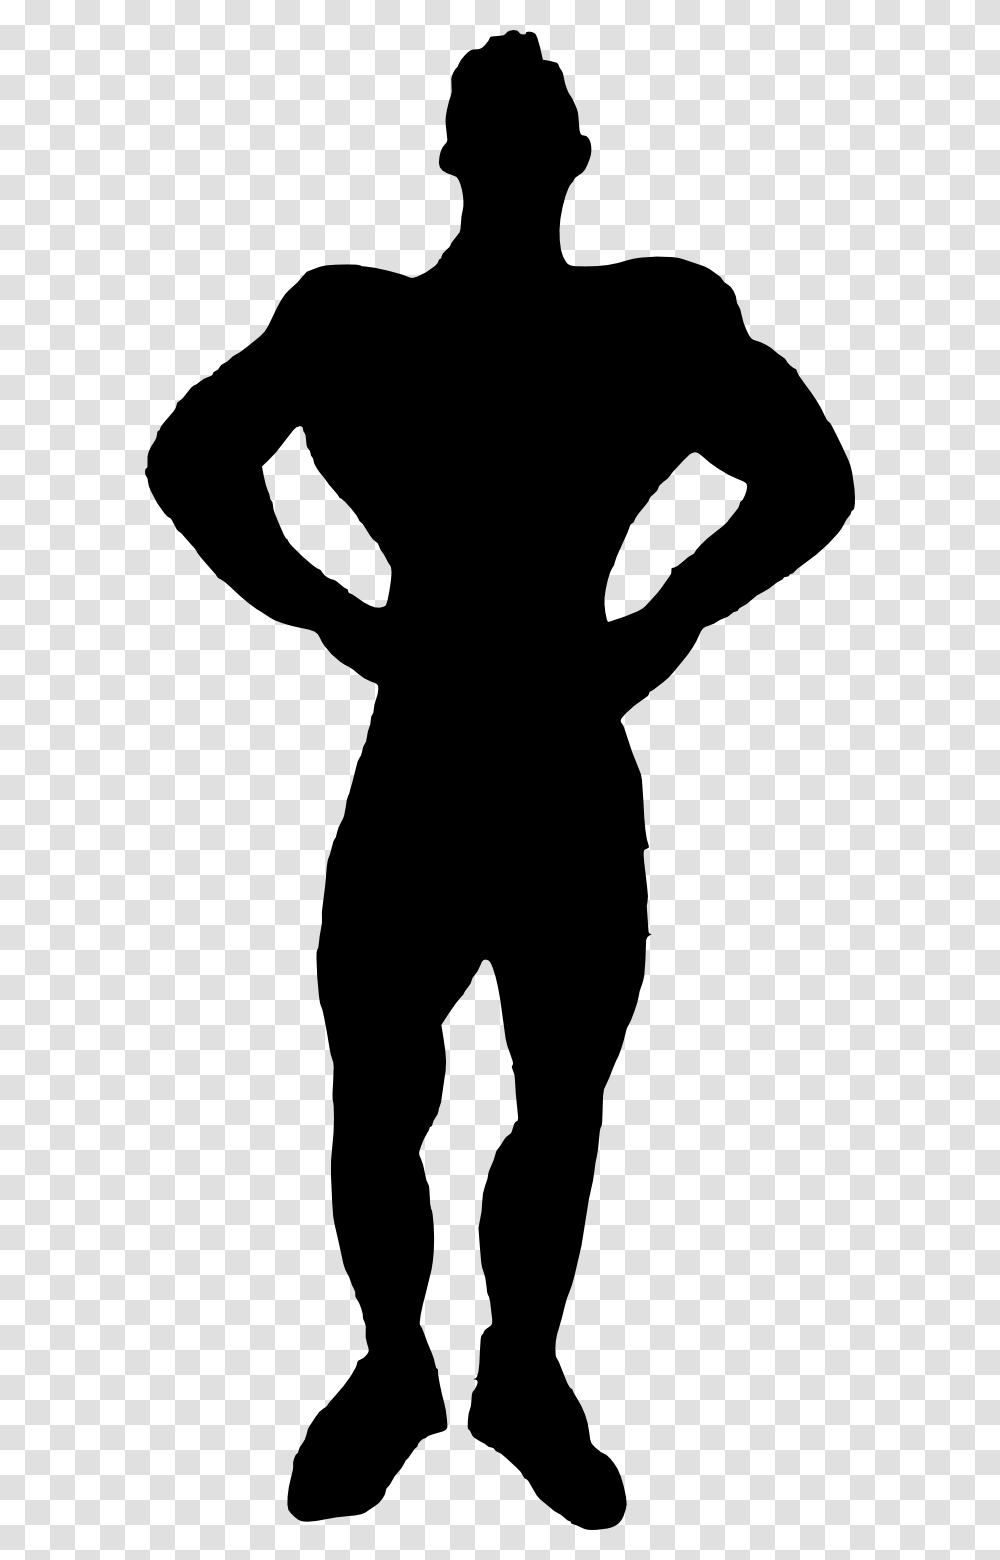 Muscle Man Bodybuilder Silhouette Muscle Man Silhouette, Person, Human, Stencil Transparent Png